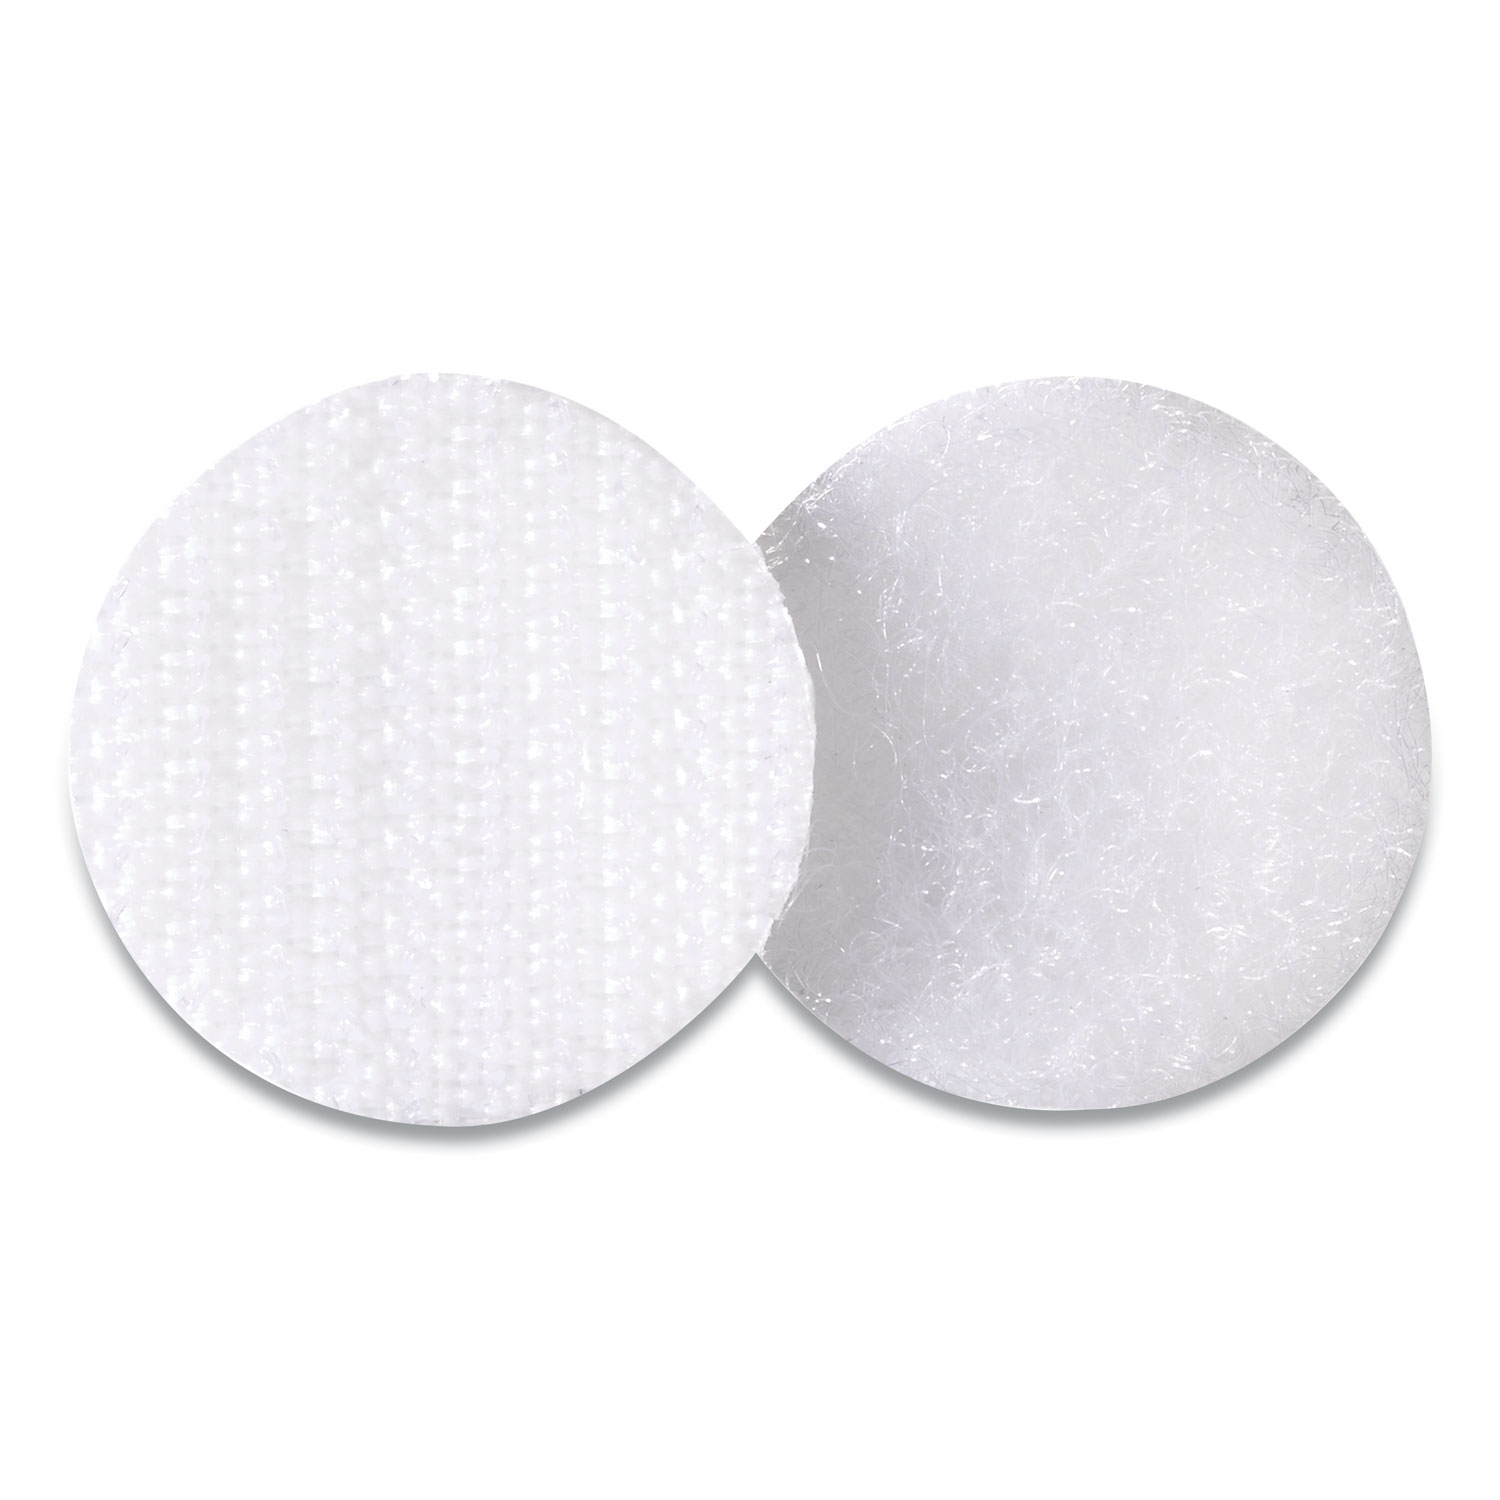 VELCRO® Sticky Back Fasteners - 16.67 yd Length x 0.75 Width - 1 / Roll -  White - R&A Office Supplies